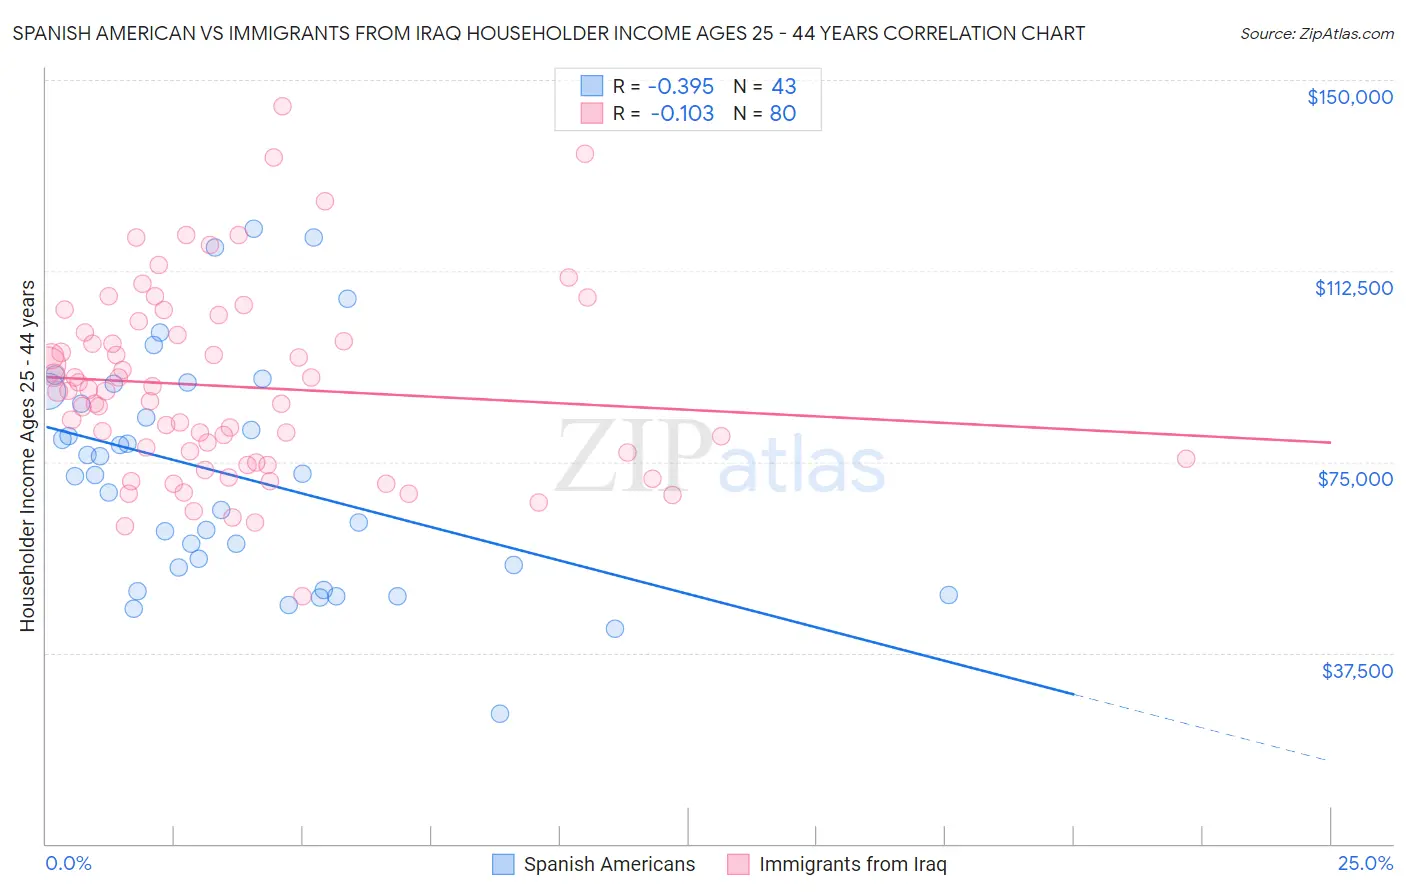 Spanish American vs Immigrants from Iraq Householder Income Ages 25 - 44 years